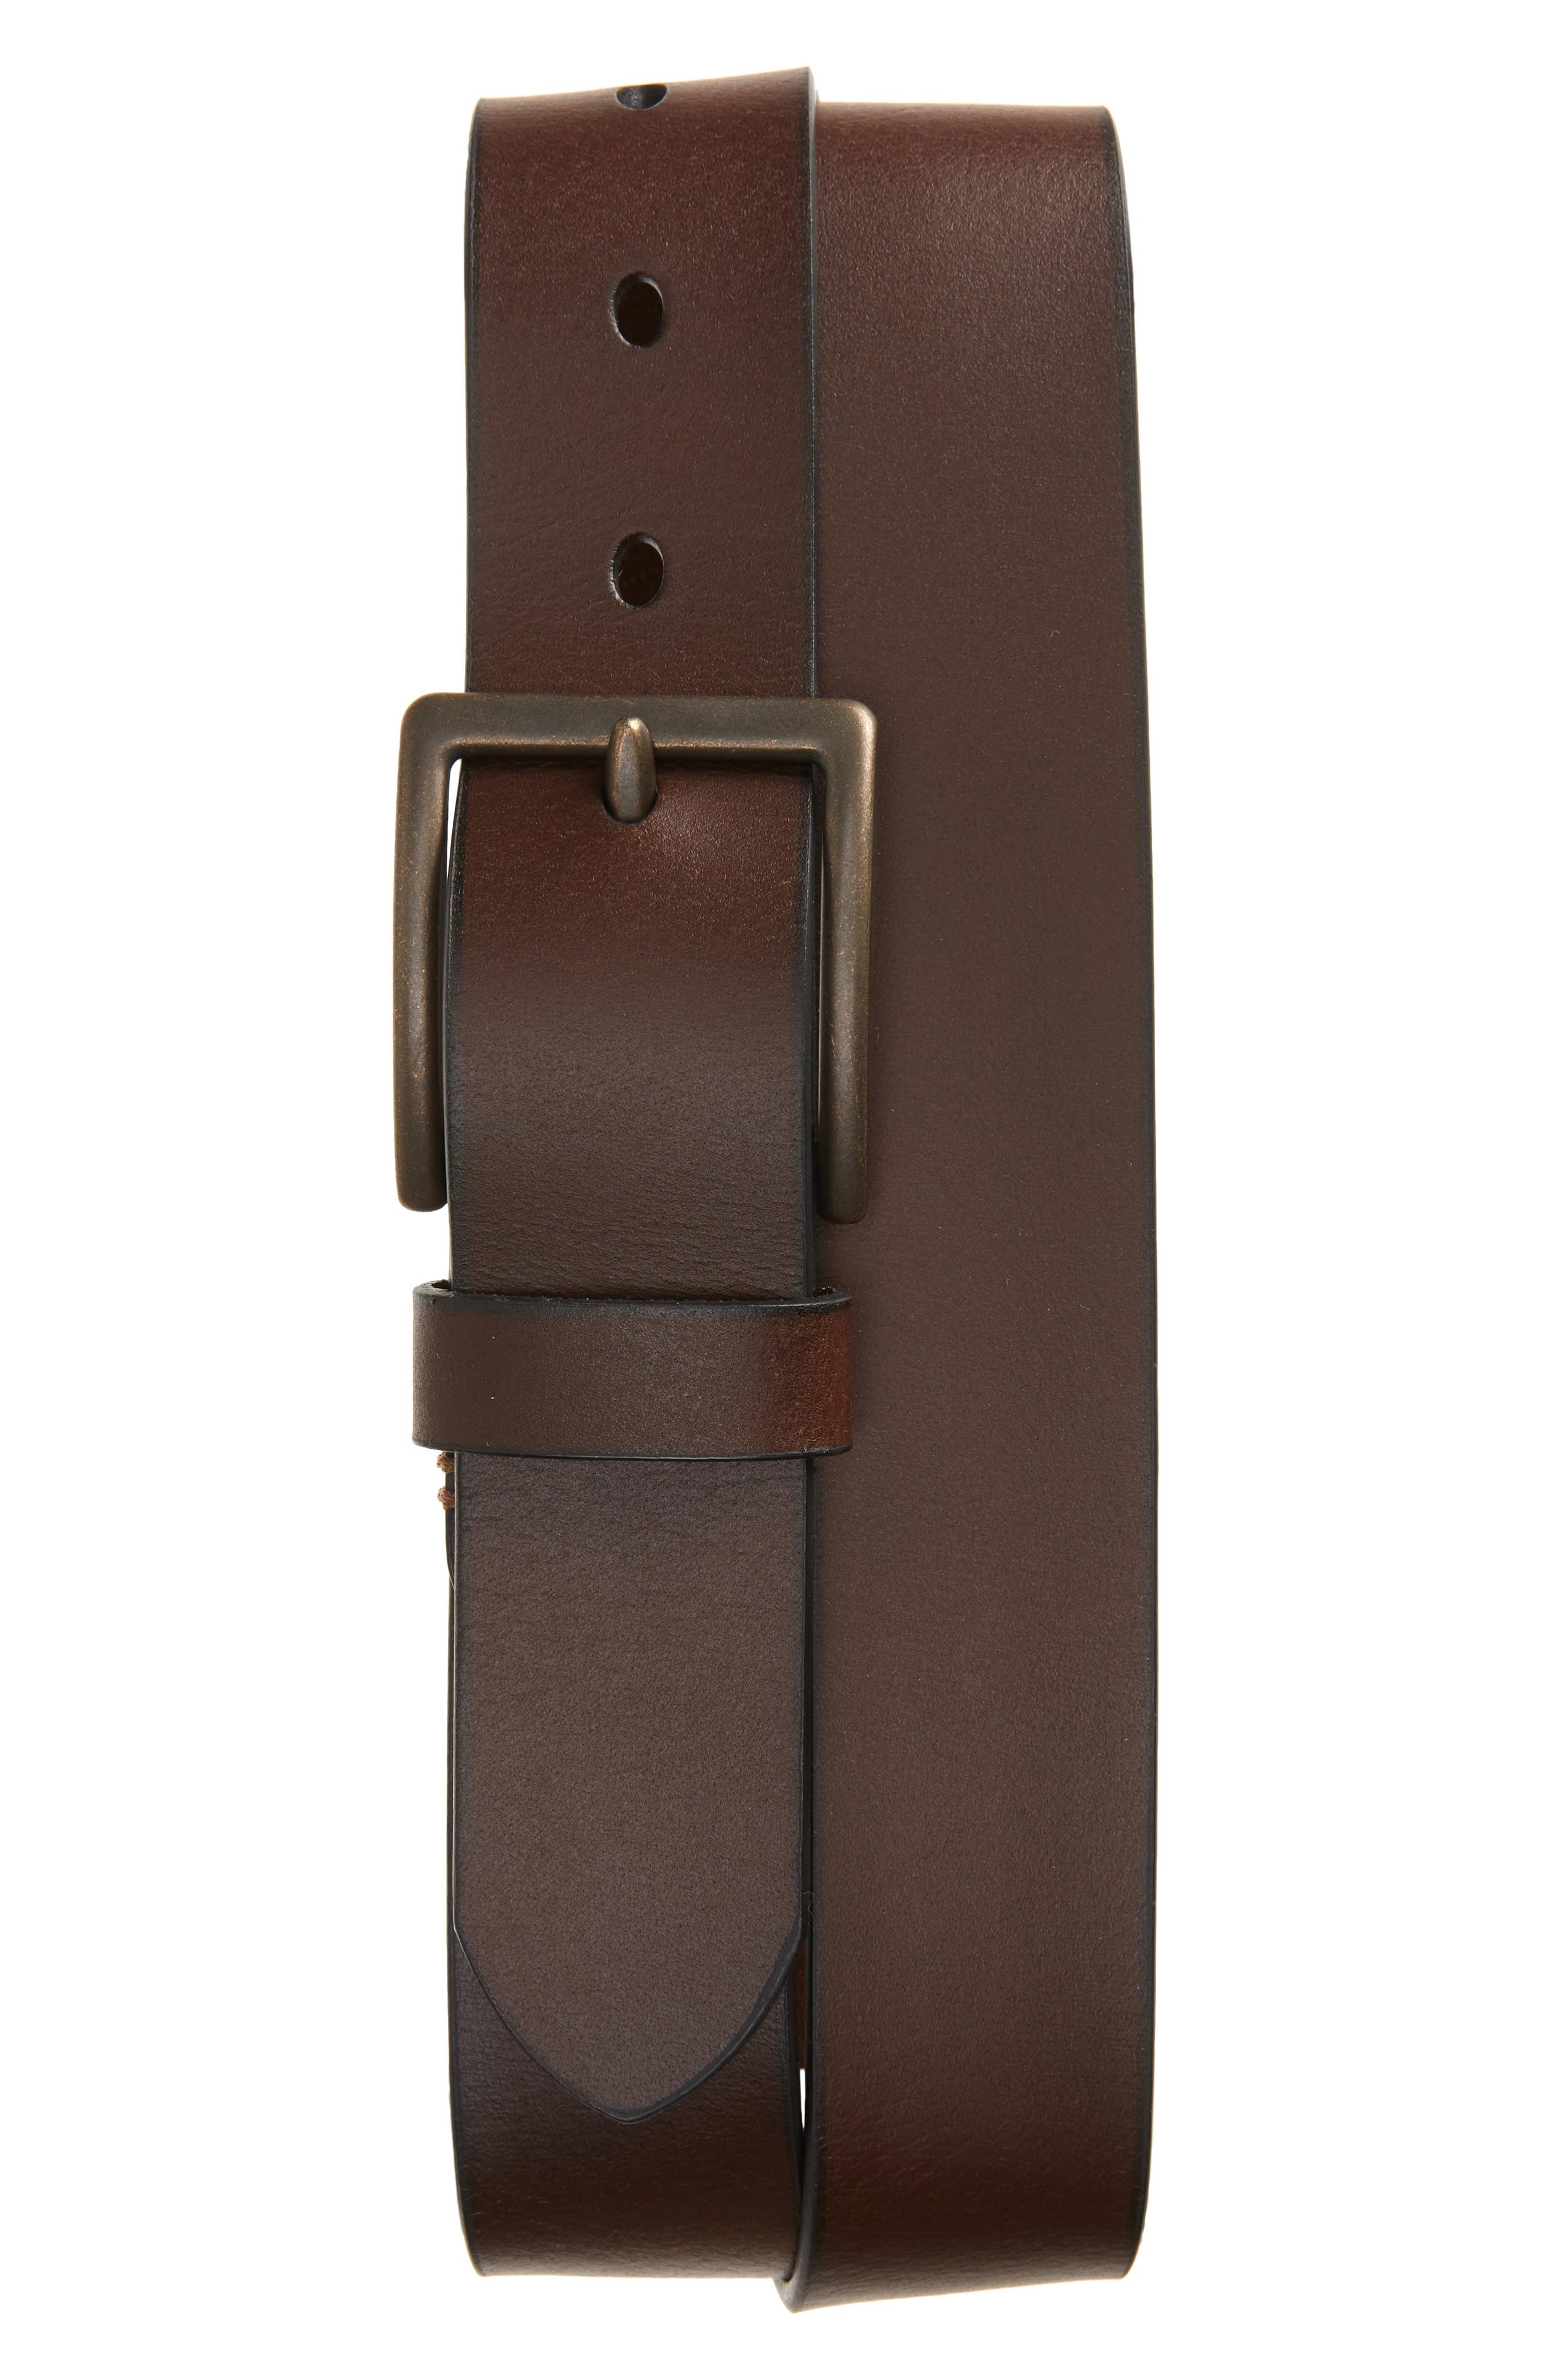 Reversible Belt Leather Belt with Green 32 mm 1.25 with Belt Z-Buckle with Personalized Belt Buckle Christmas Gift